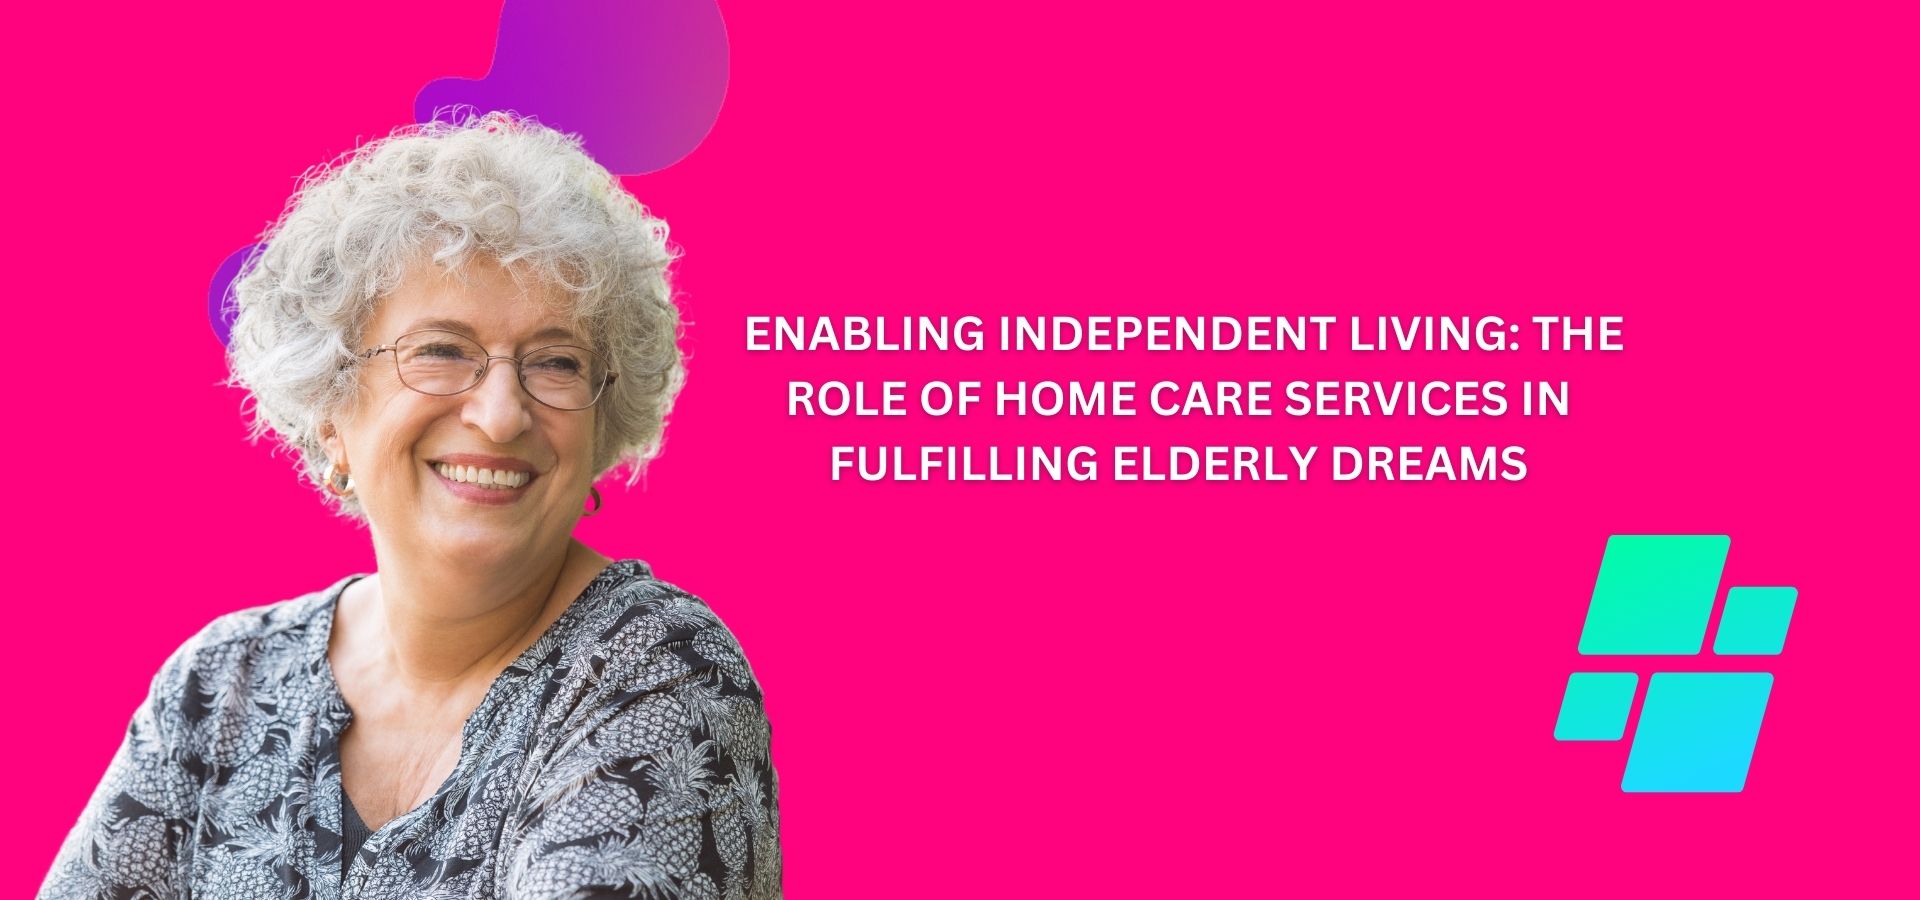 Enabling Independent Living: The Role of Home Care Services in Fulfilling Elderly Dreams